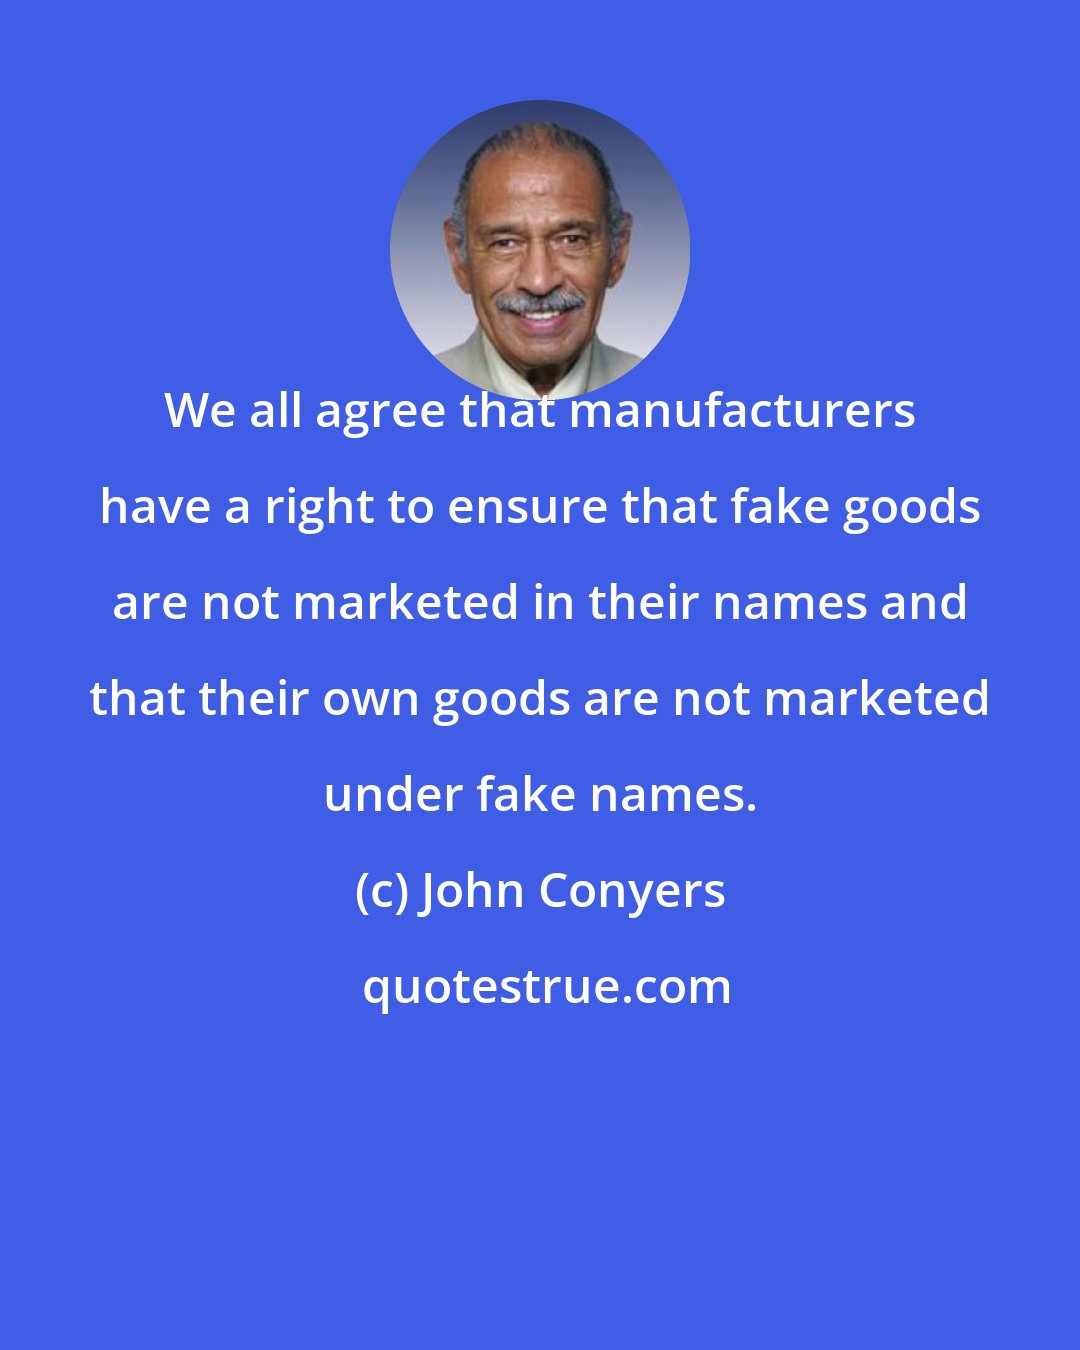 John Conyers: We all agree that manufacturers have a right to ensure that fake goods are not marketed in their names and that their own goods are not marketed under fake names.